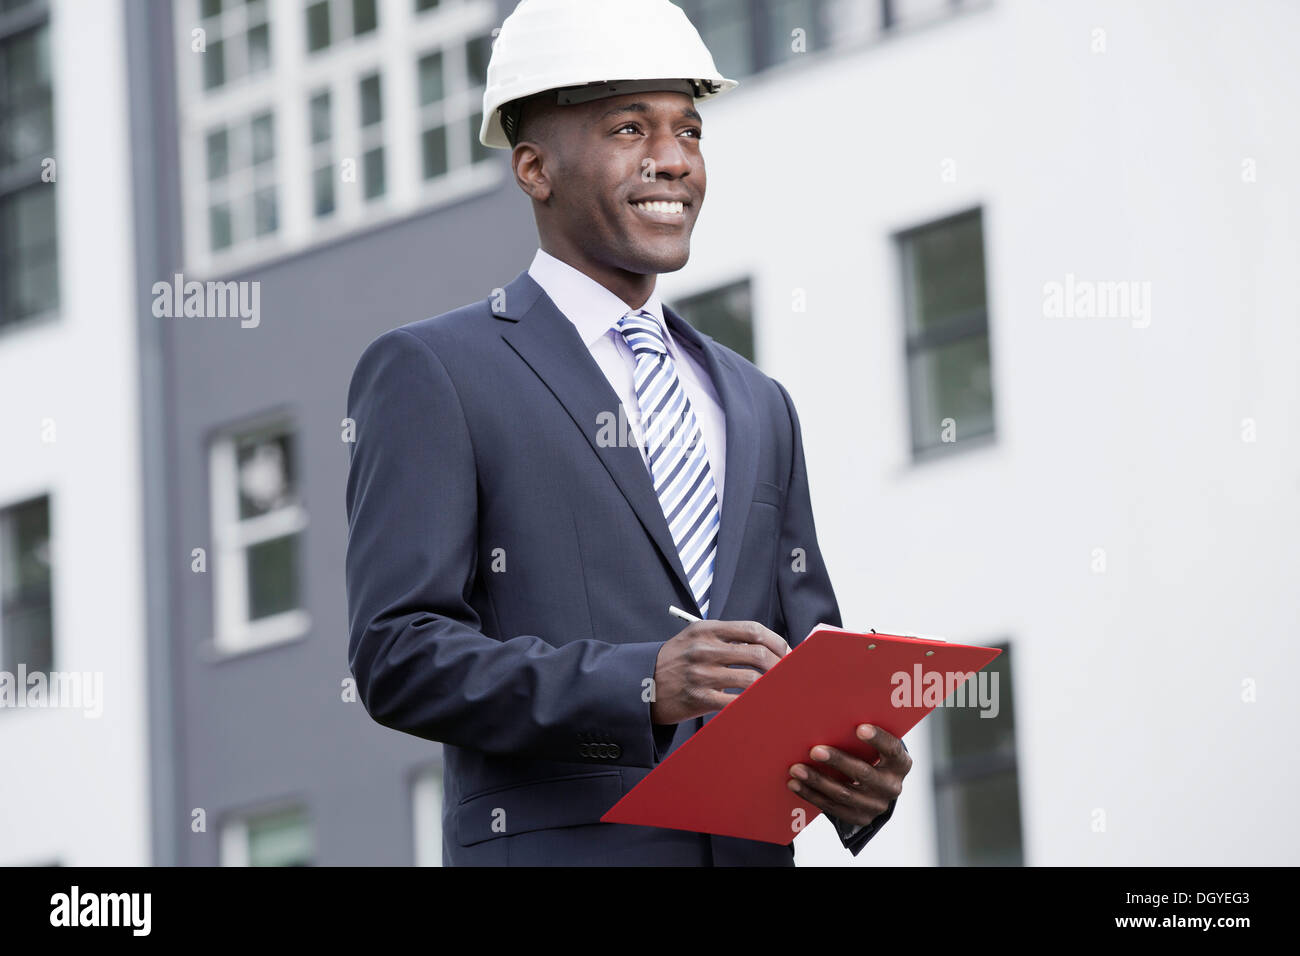 Businessman happily overseeing his work Stock Photo